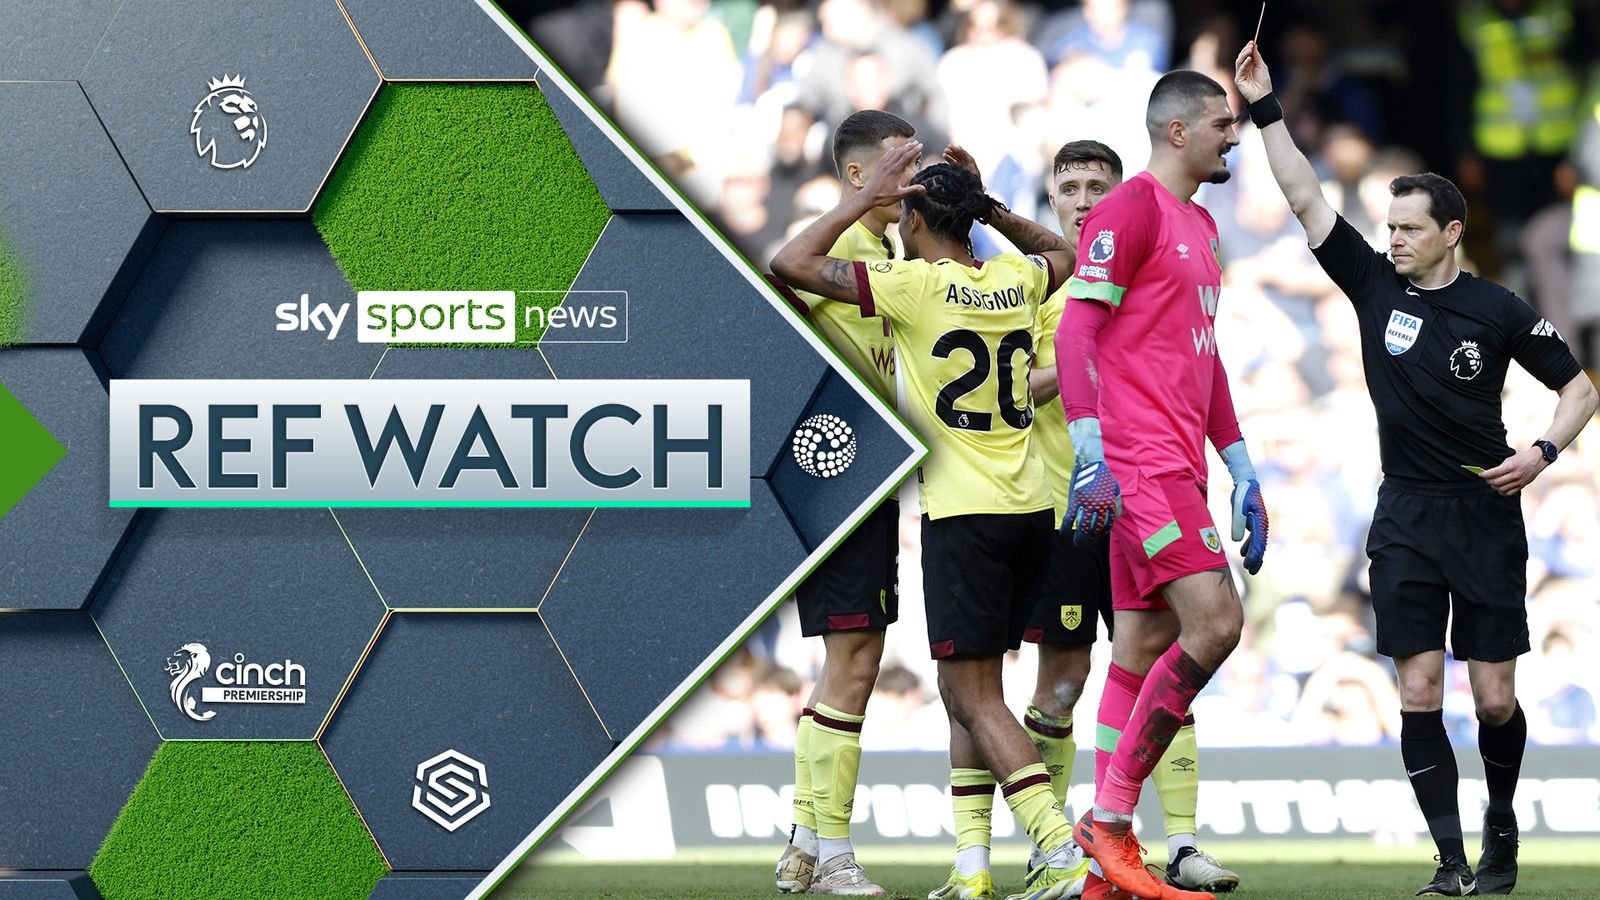 Ref Watch: Burnley on wrong end of incorrect penalty and red card decision, while Everton’s Dominic Calvert-Lewin should have had a spot-kick | Football News